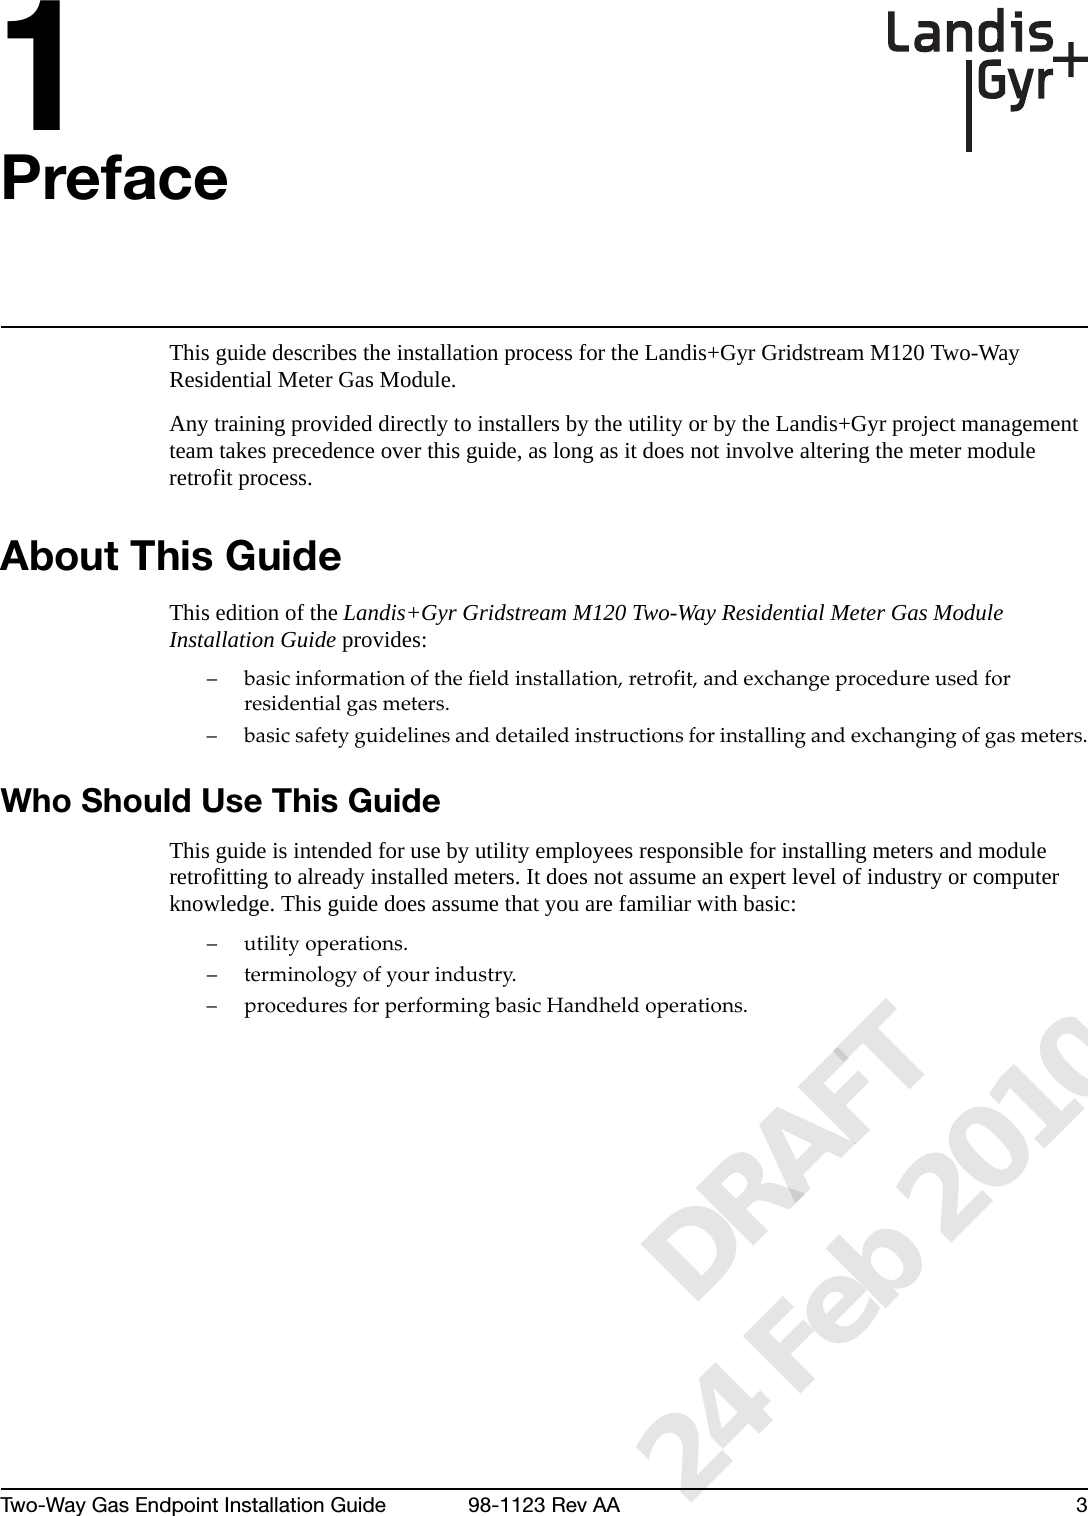 1Two-Way Gas Endpoint Installation Guide 98-1123 Rev AA 3PrefaceThis guide describes the installation process for the Landis+Gyr Gridstream M120 Two-Way Residential Meter Gas Module.Any training provided directly to installers by the utility or by the Landis+Gyr project management team takes precedence over this guide, as long as it does not involve altering the meter module retrofit process.About This GuideThis edition of the Landis+Gyr Gridstream M120 Two-Way Residential Meter Gas Module Installation Guide provides: –basicinformationofthefieldinstallation,retrofit,andexchangeprocedureusedforresidentialgasmeters.–basicsafetyguidelinesanddetailedinstructionsforinstallingandexchangingofgasmeters.Who Should Use This GuideThis guide is intended for use by utility employees responsible for installing meters and module retrofitting to already installed meters. It does not assume an expert level of industry or computer knowledge. This guide does assume that you are familiar with basic:–utilityoperations.– terminologyofyourindustry.– proceduresforperformingbasicHandheldoperations.      DRAFT 24 Feb 2010